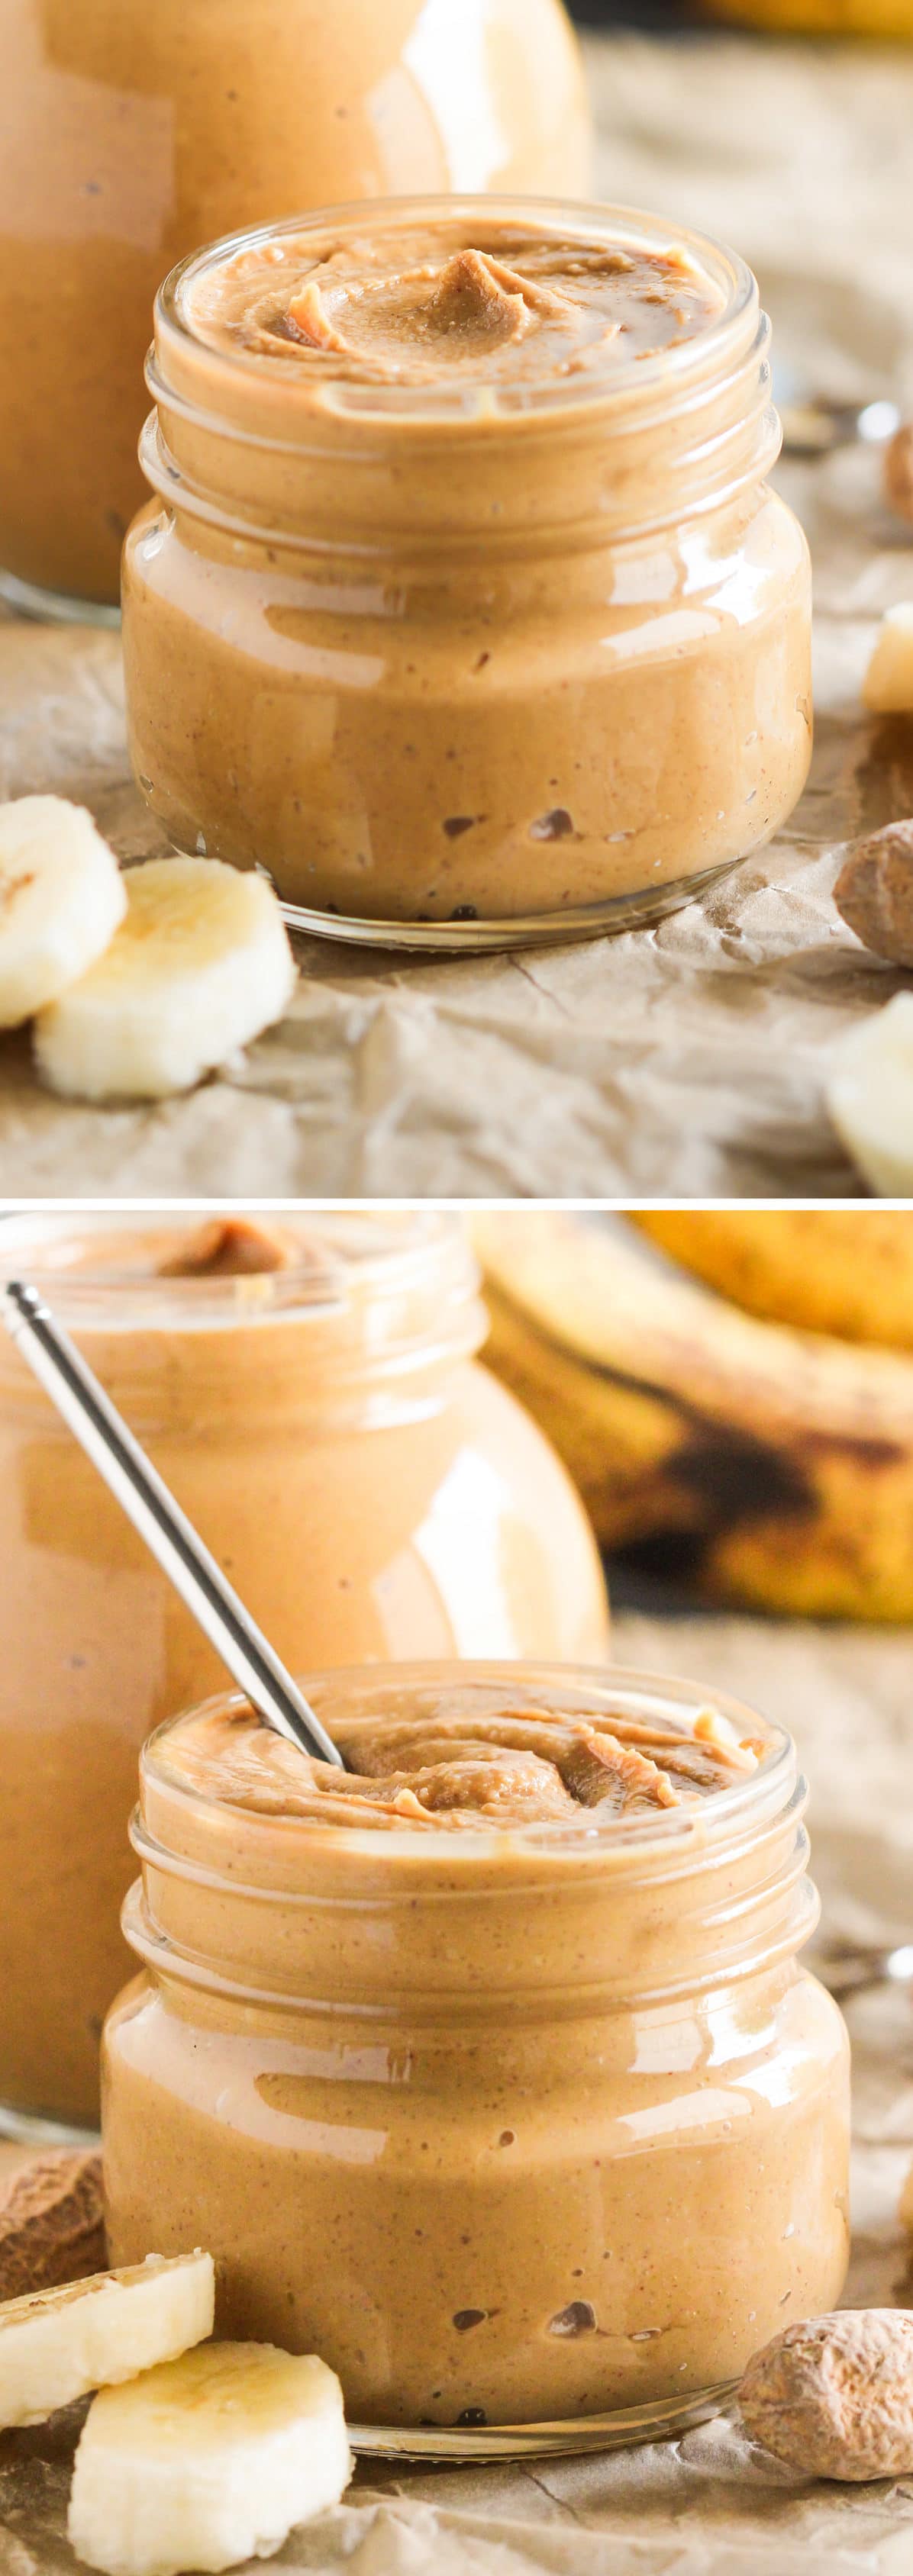 Healthy Homemade Banana Peanut Butter Spread! If you like bananas and if you like peanut butter, then you’ll LOVE this. 100% delicious and perfect on toast, oatmeal, ice cream, or a spoon alone! No sugar added (refined sugar free), gluten free, vegan. Healthy Dessert Recipes with low calorie, low fat, low carb, high protein, dairy free, vegan, and raw options at the Desserts With Benefits Blog (www.DessertsWithBenefits.com)